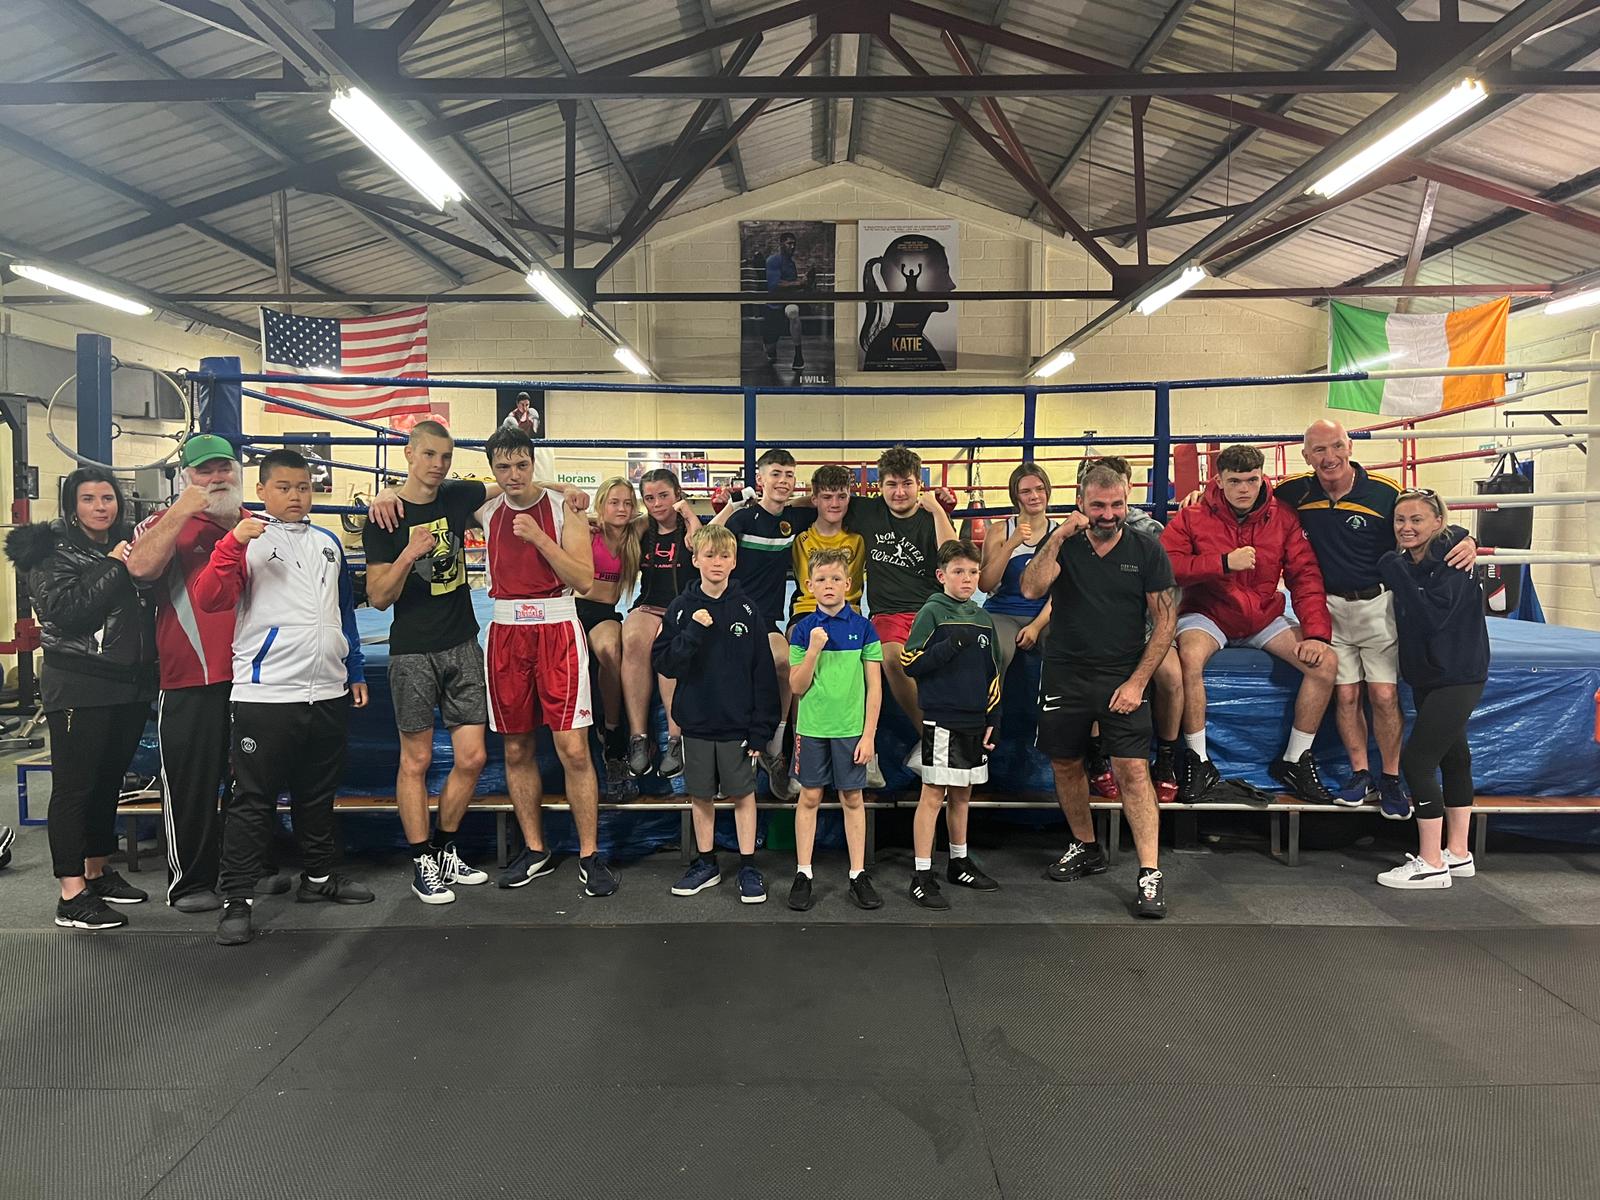 Teenage Boxing for Better Mental Health event at Kerry Mental Health & Wellbeing Fest 2022